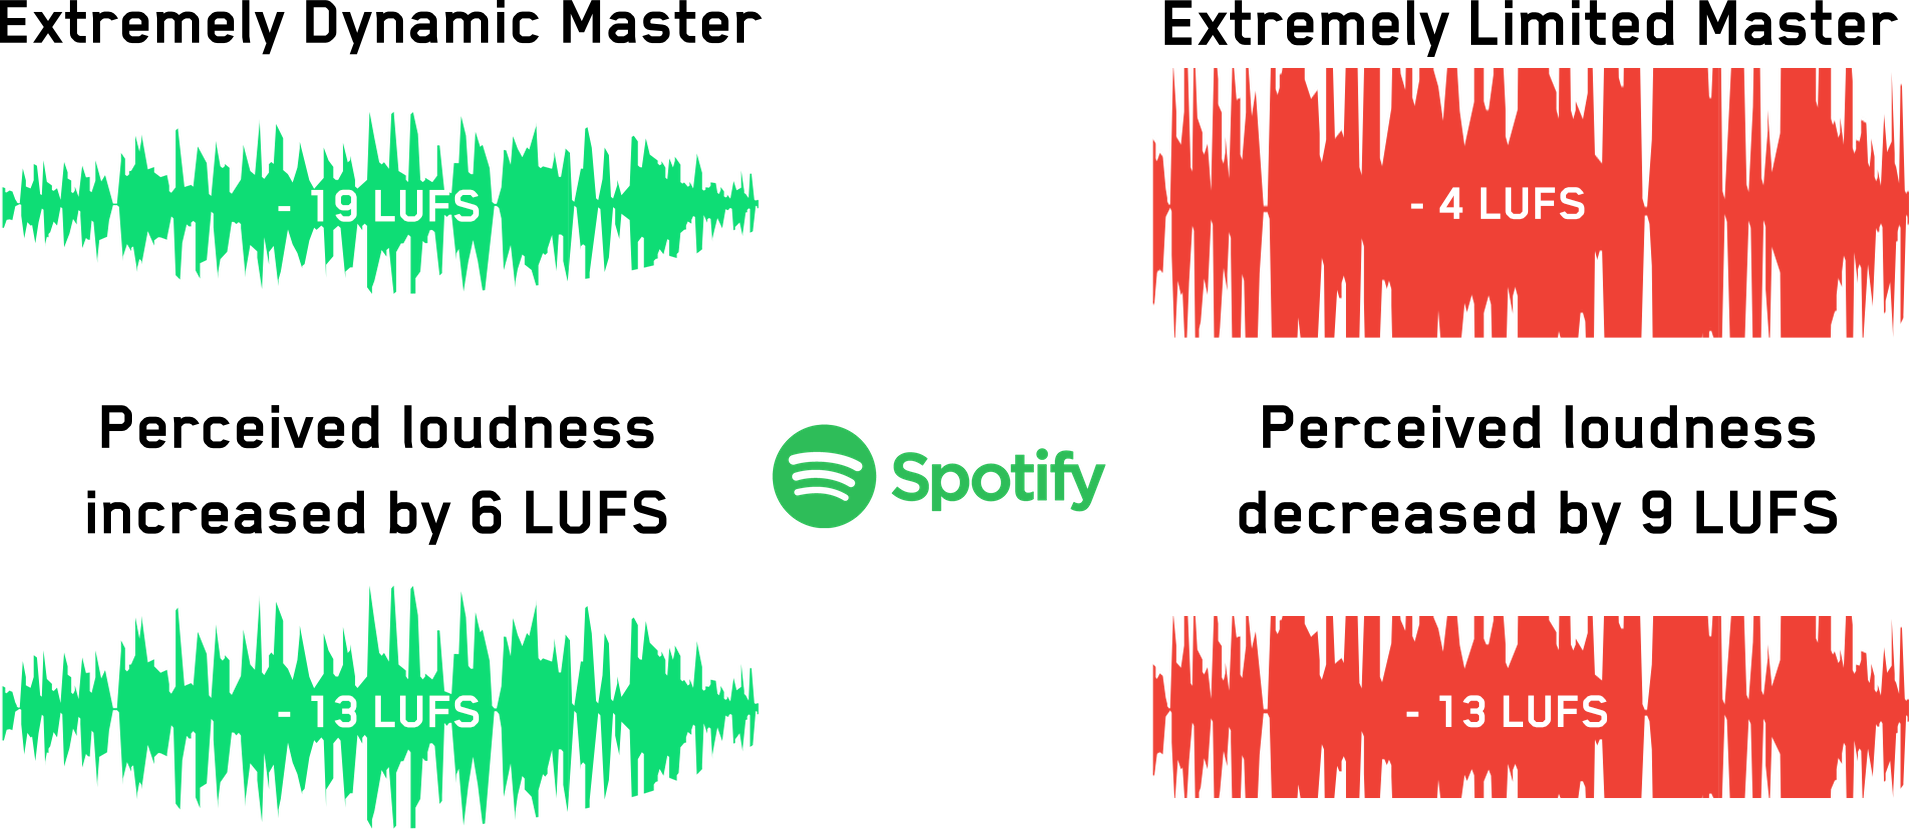 Spotify_LUFS_normalisation_Infographic_841cb52b-8f4f-4503-a202-e9d4c9f371c3-1339149402.png